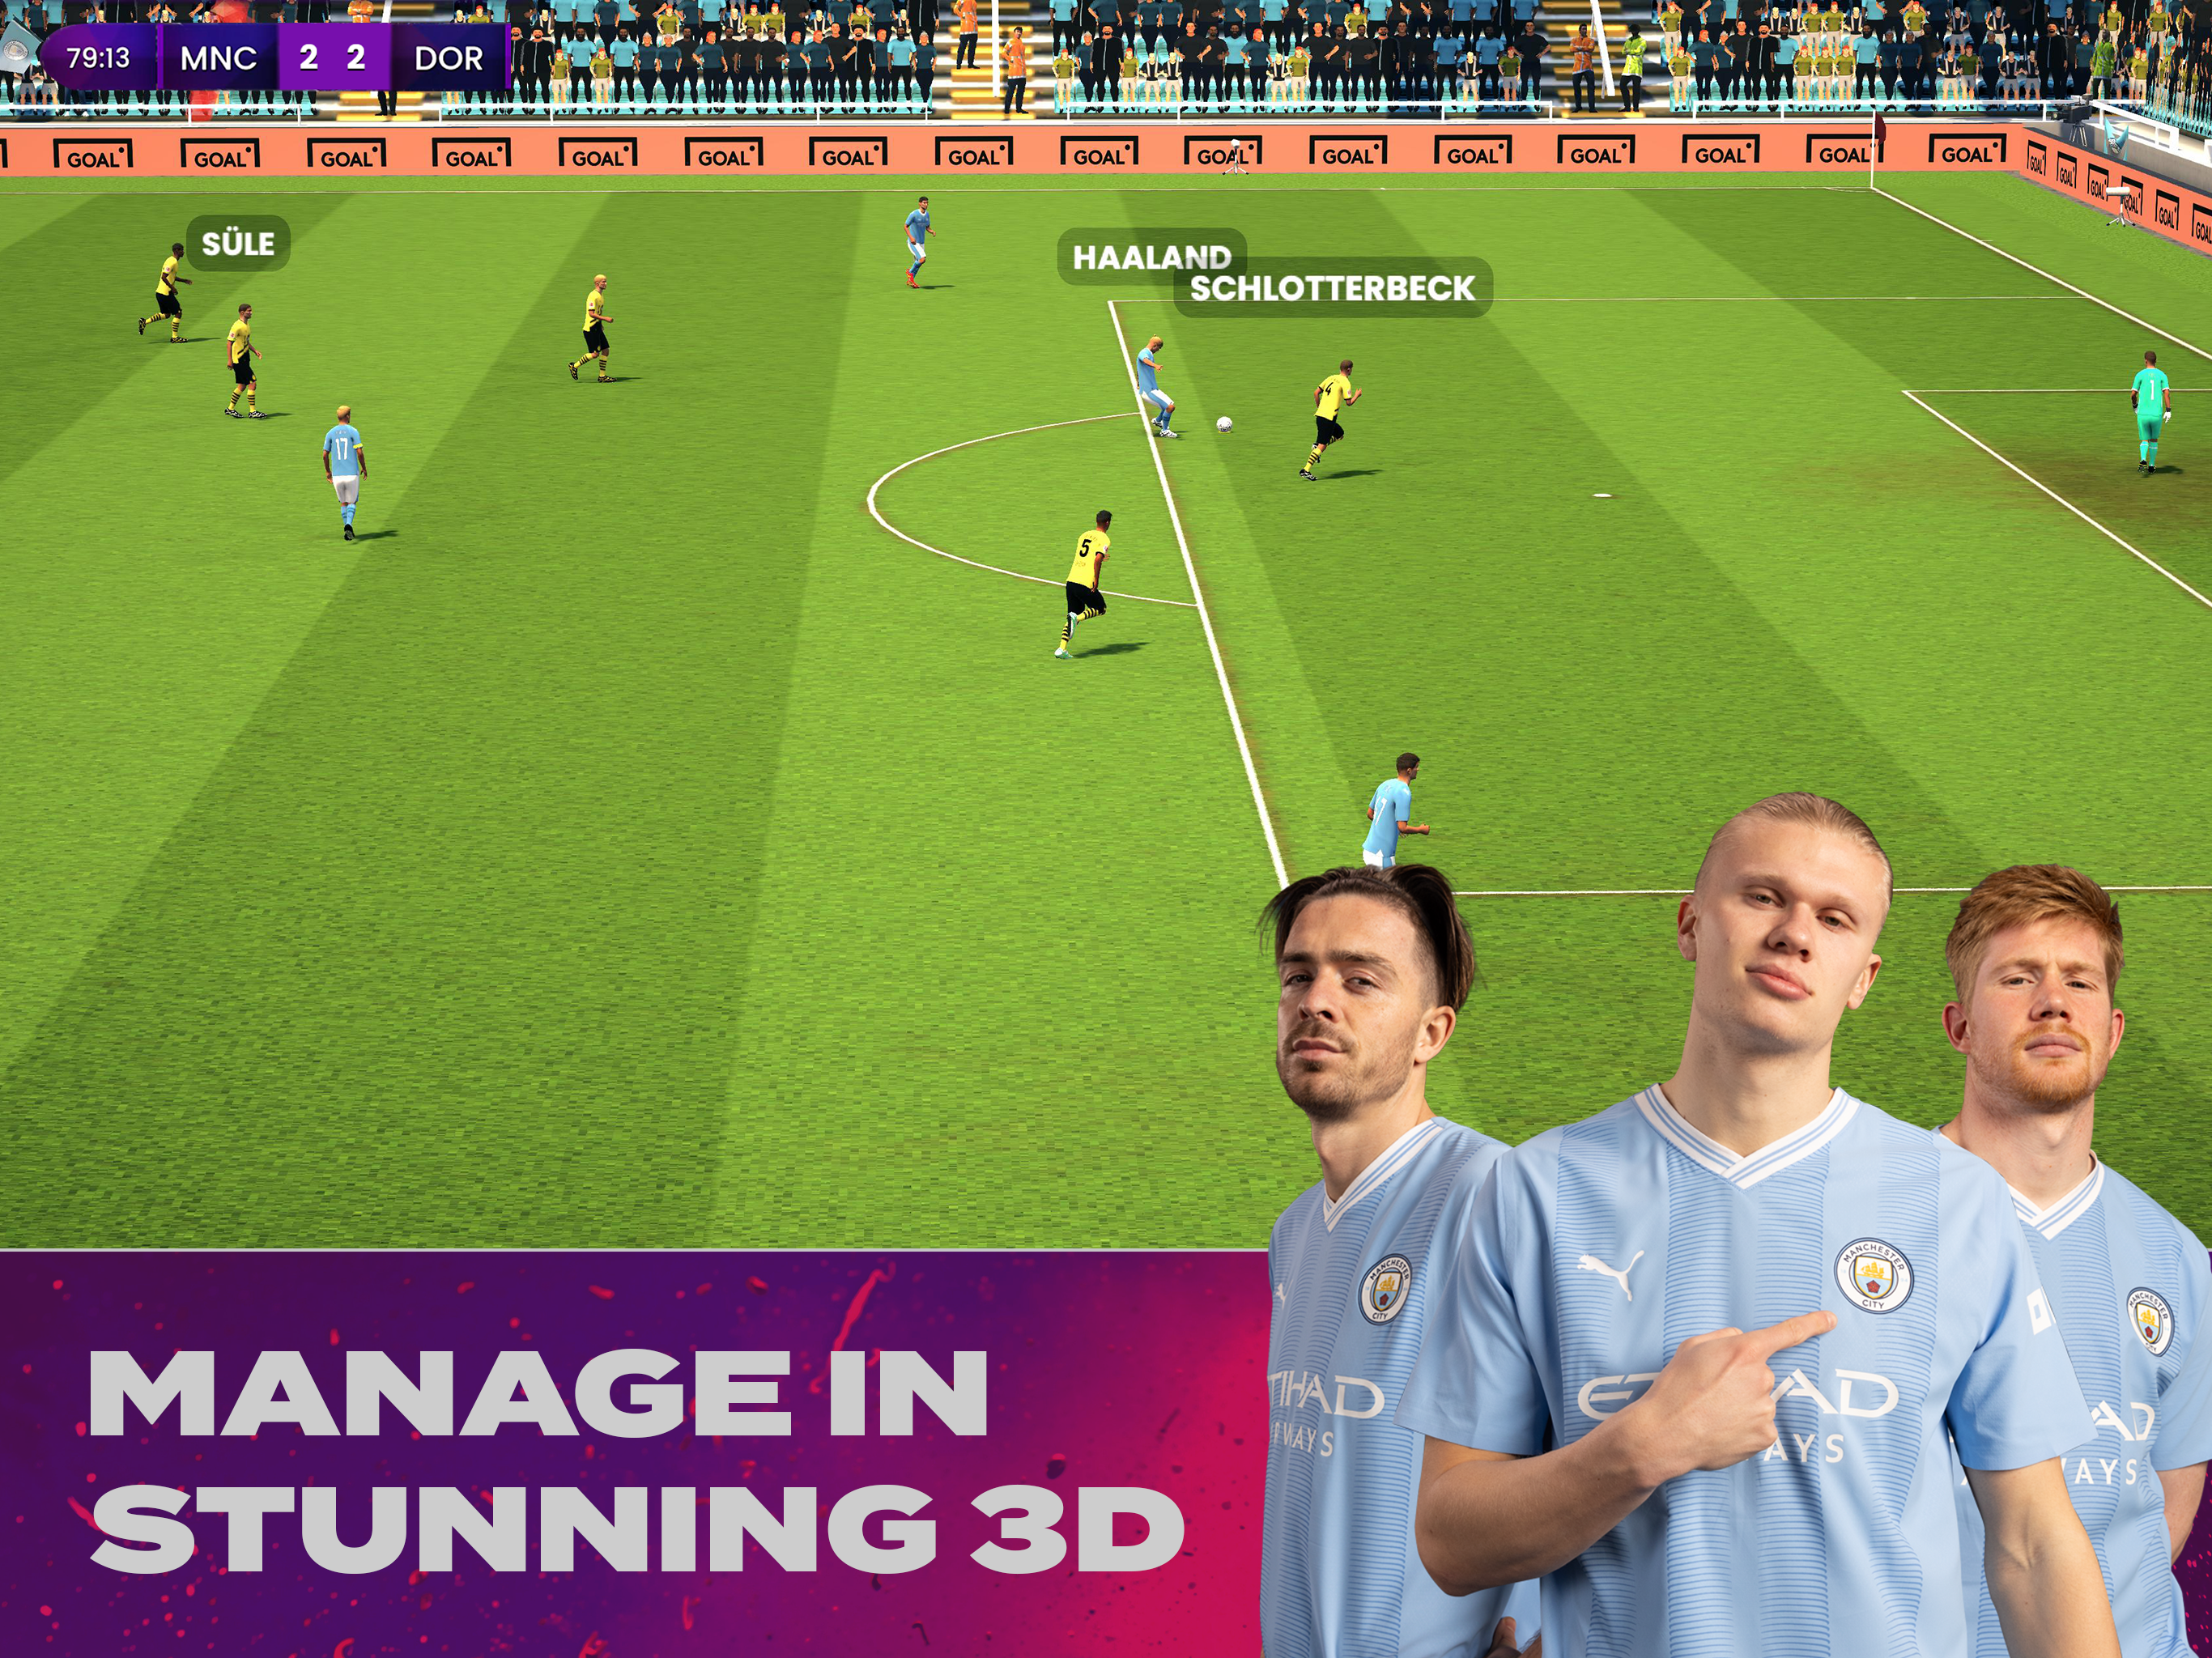 Football Manager 2024 Minimum System Requirements